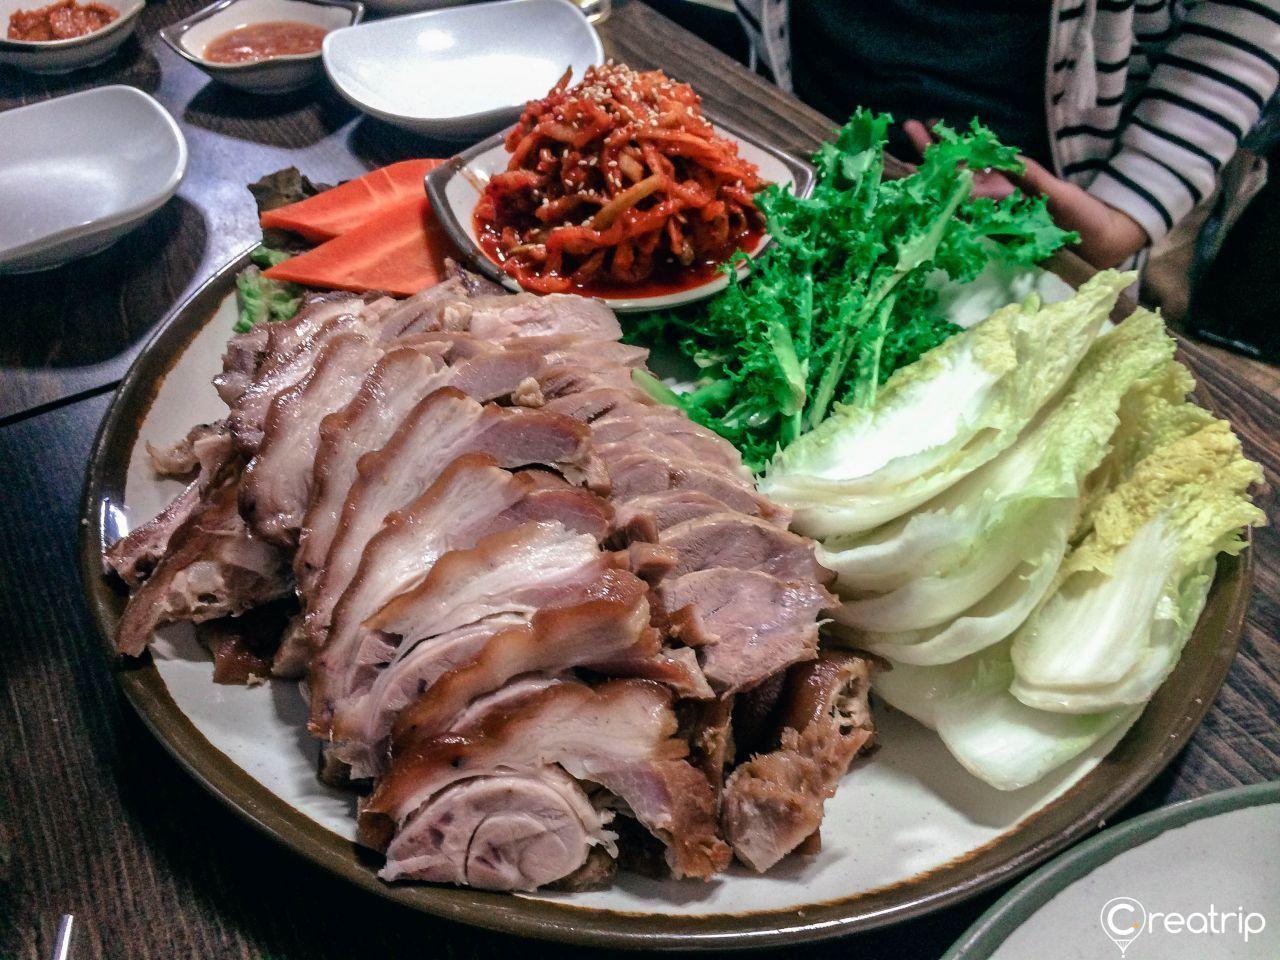 A platter of Korean-style pork trotters and sliced pork belly, with various side dishes and condiments, ready for delivery.